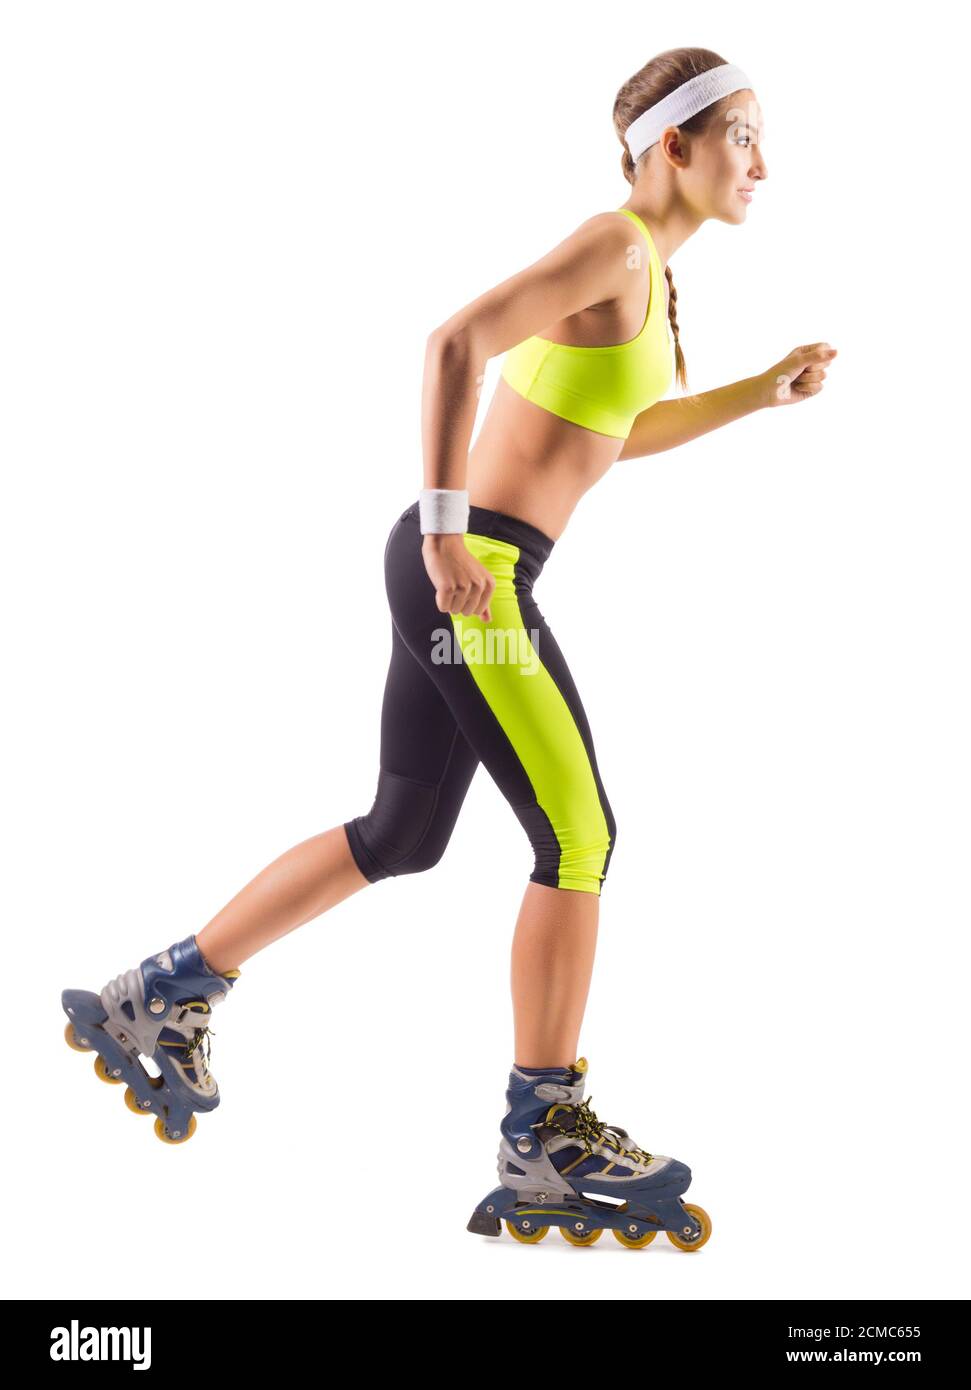 Roller skating young girl isolated Stock Photo